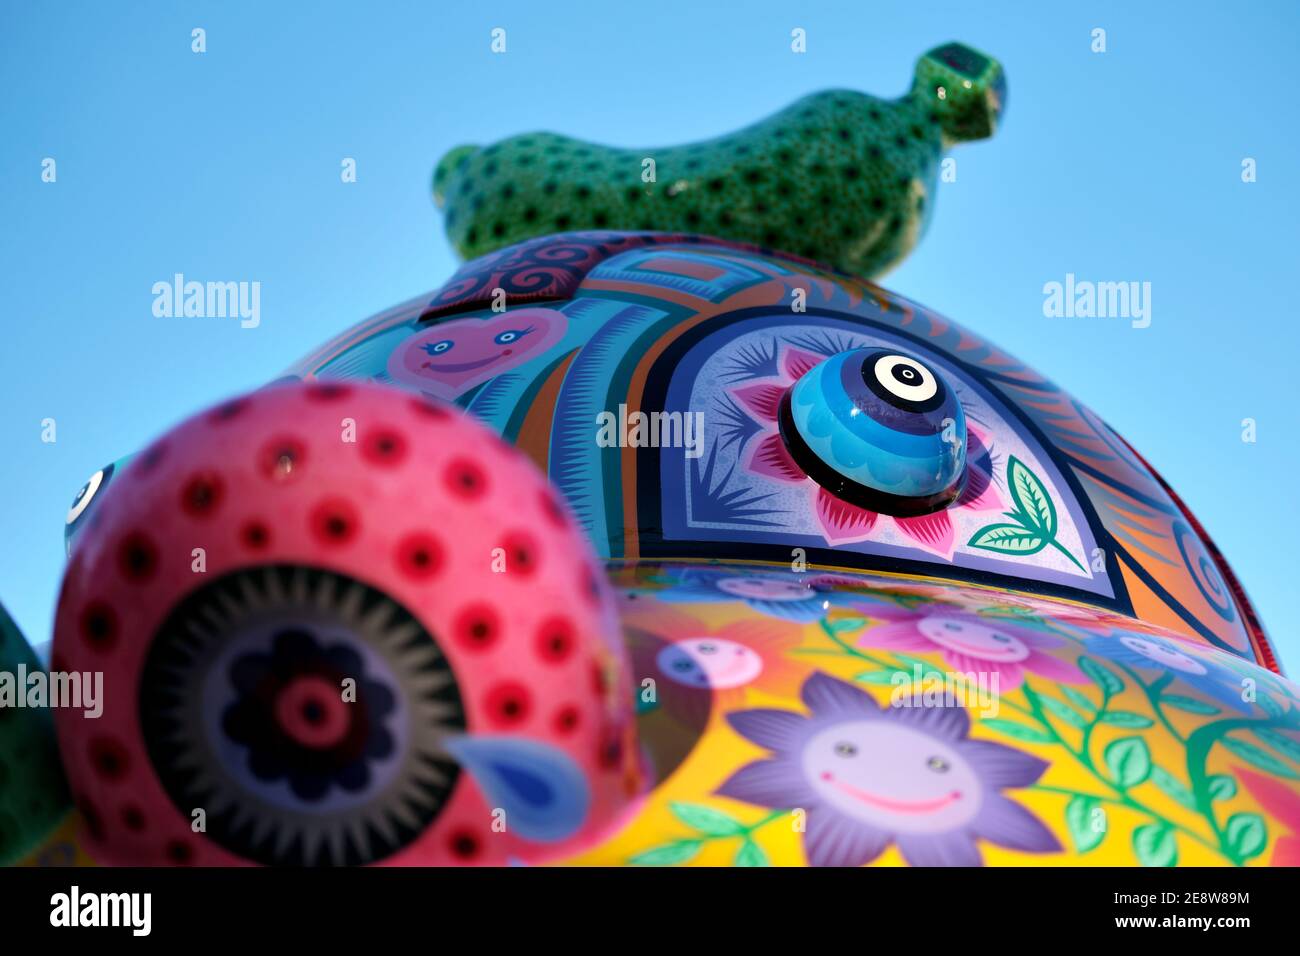 Valencia, Spain - Dec 22, 2020: Close up detail of “Hung Galaxy” animal sculpture. Exhibition in Arts and Sciences City of Taiwanese artist works Hung Stock Photo